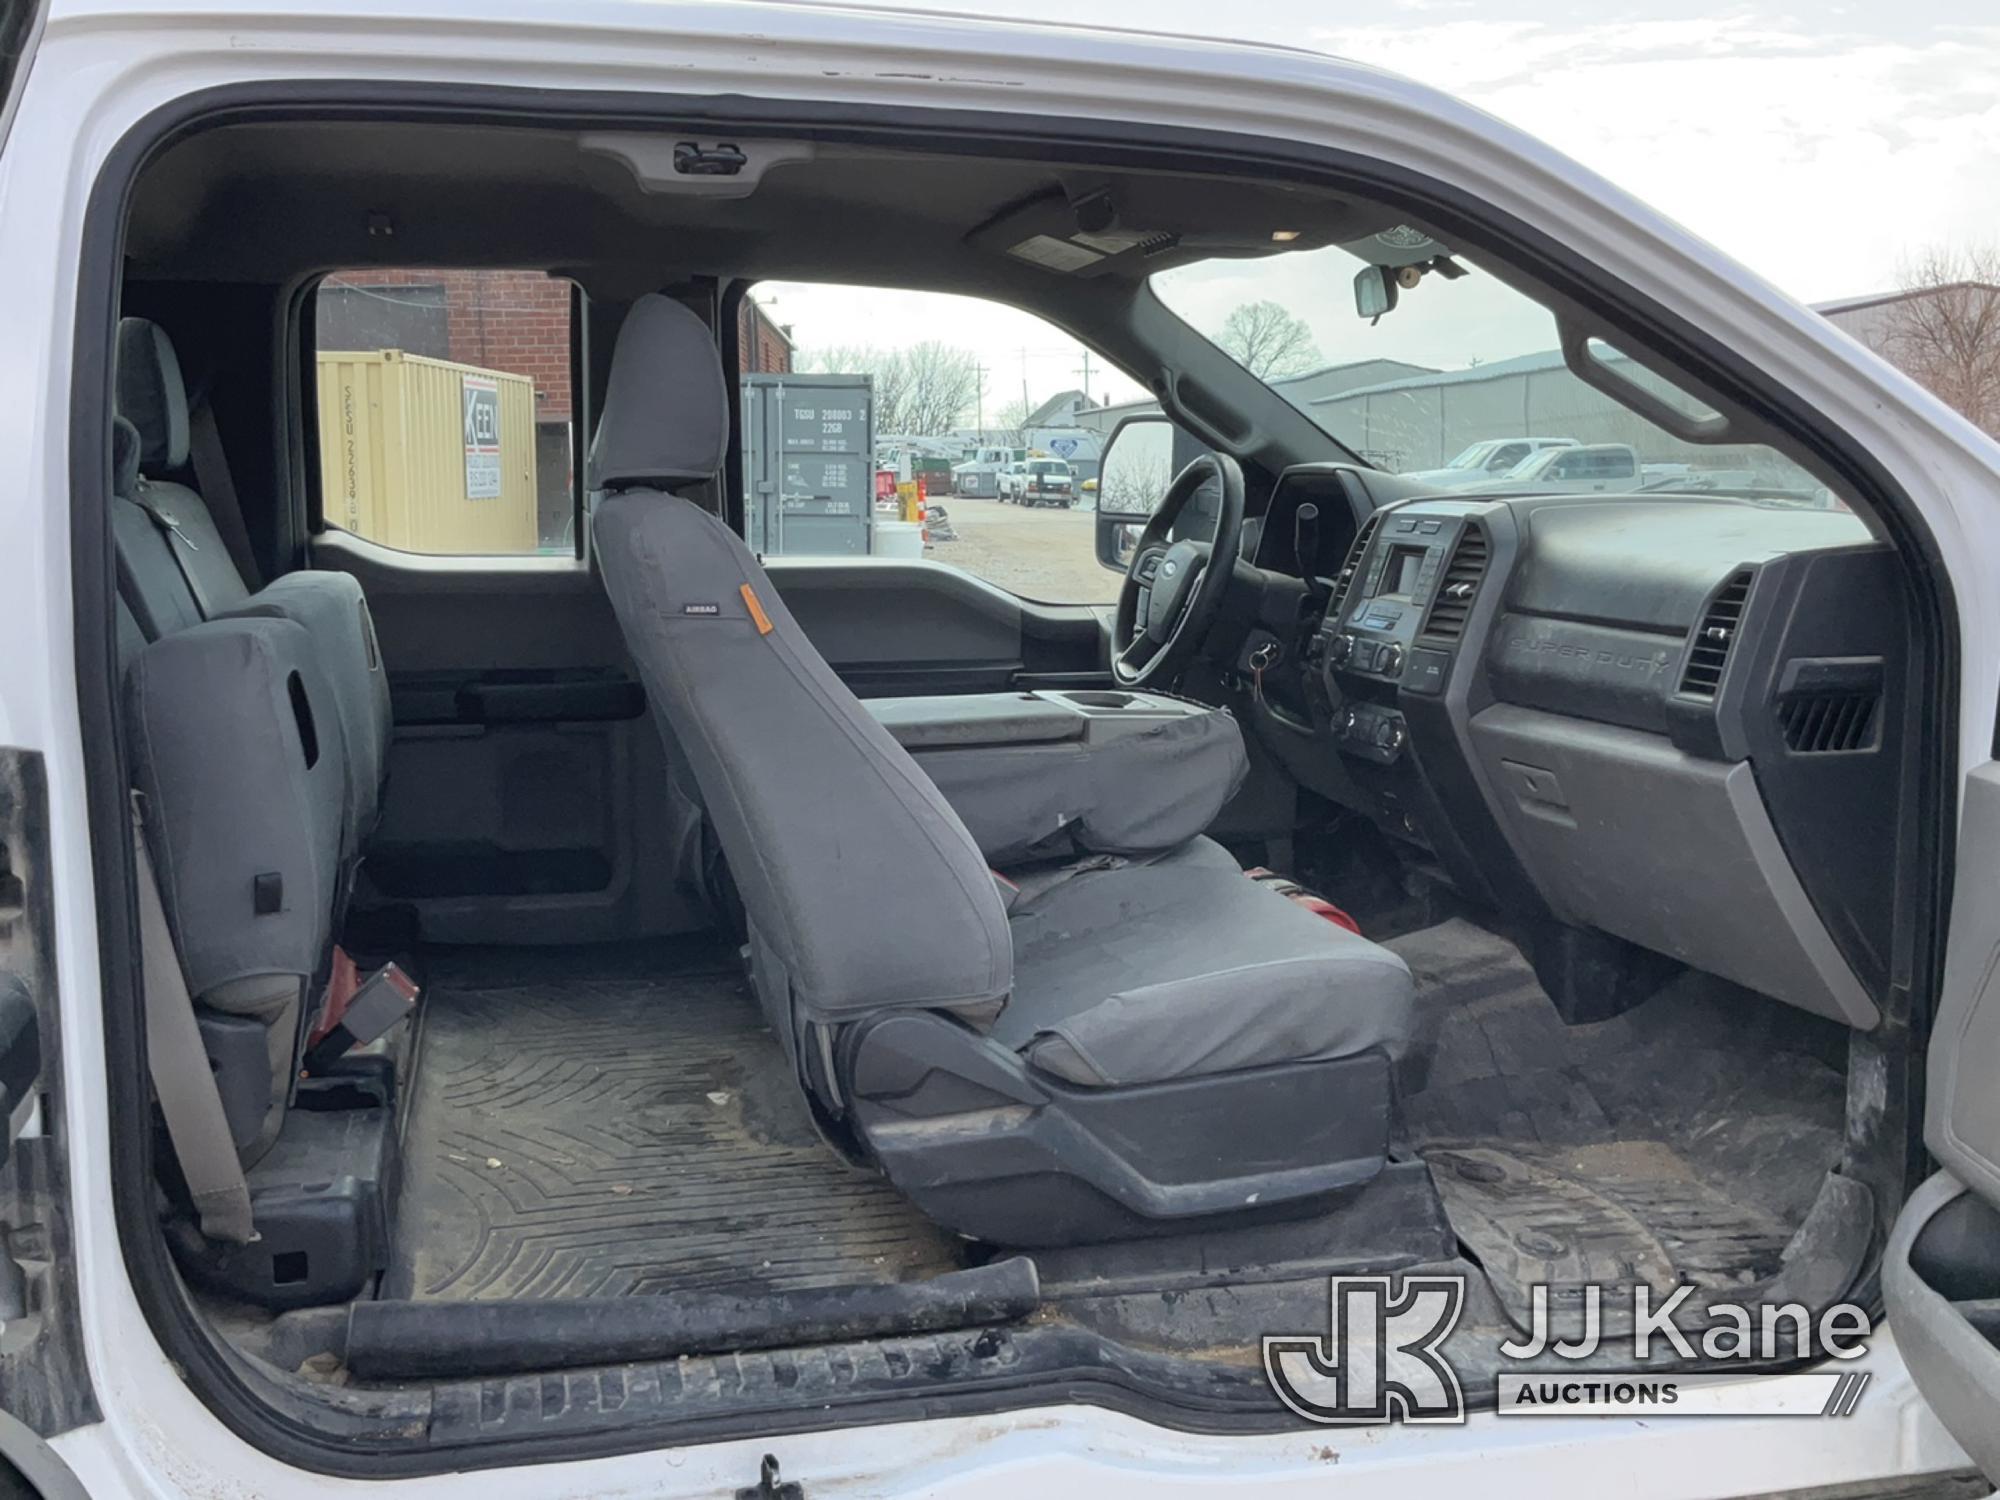 (Des Moines, IA) 2019 Ford F250 4x4 Extended-Cab Pickup Truck Runs & Moves) (Check Engine Light On